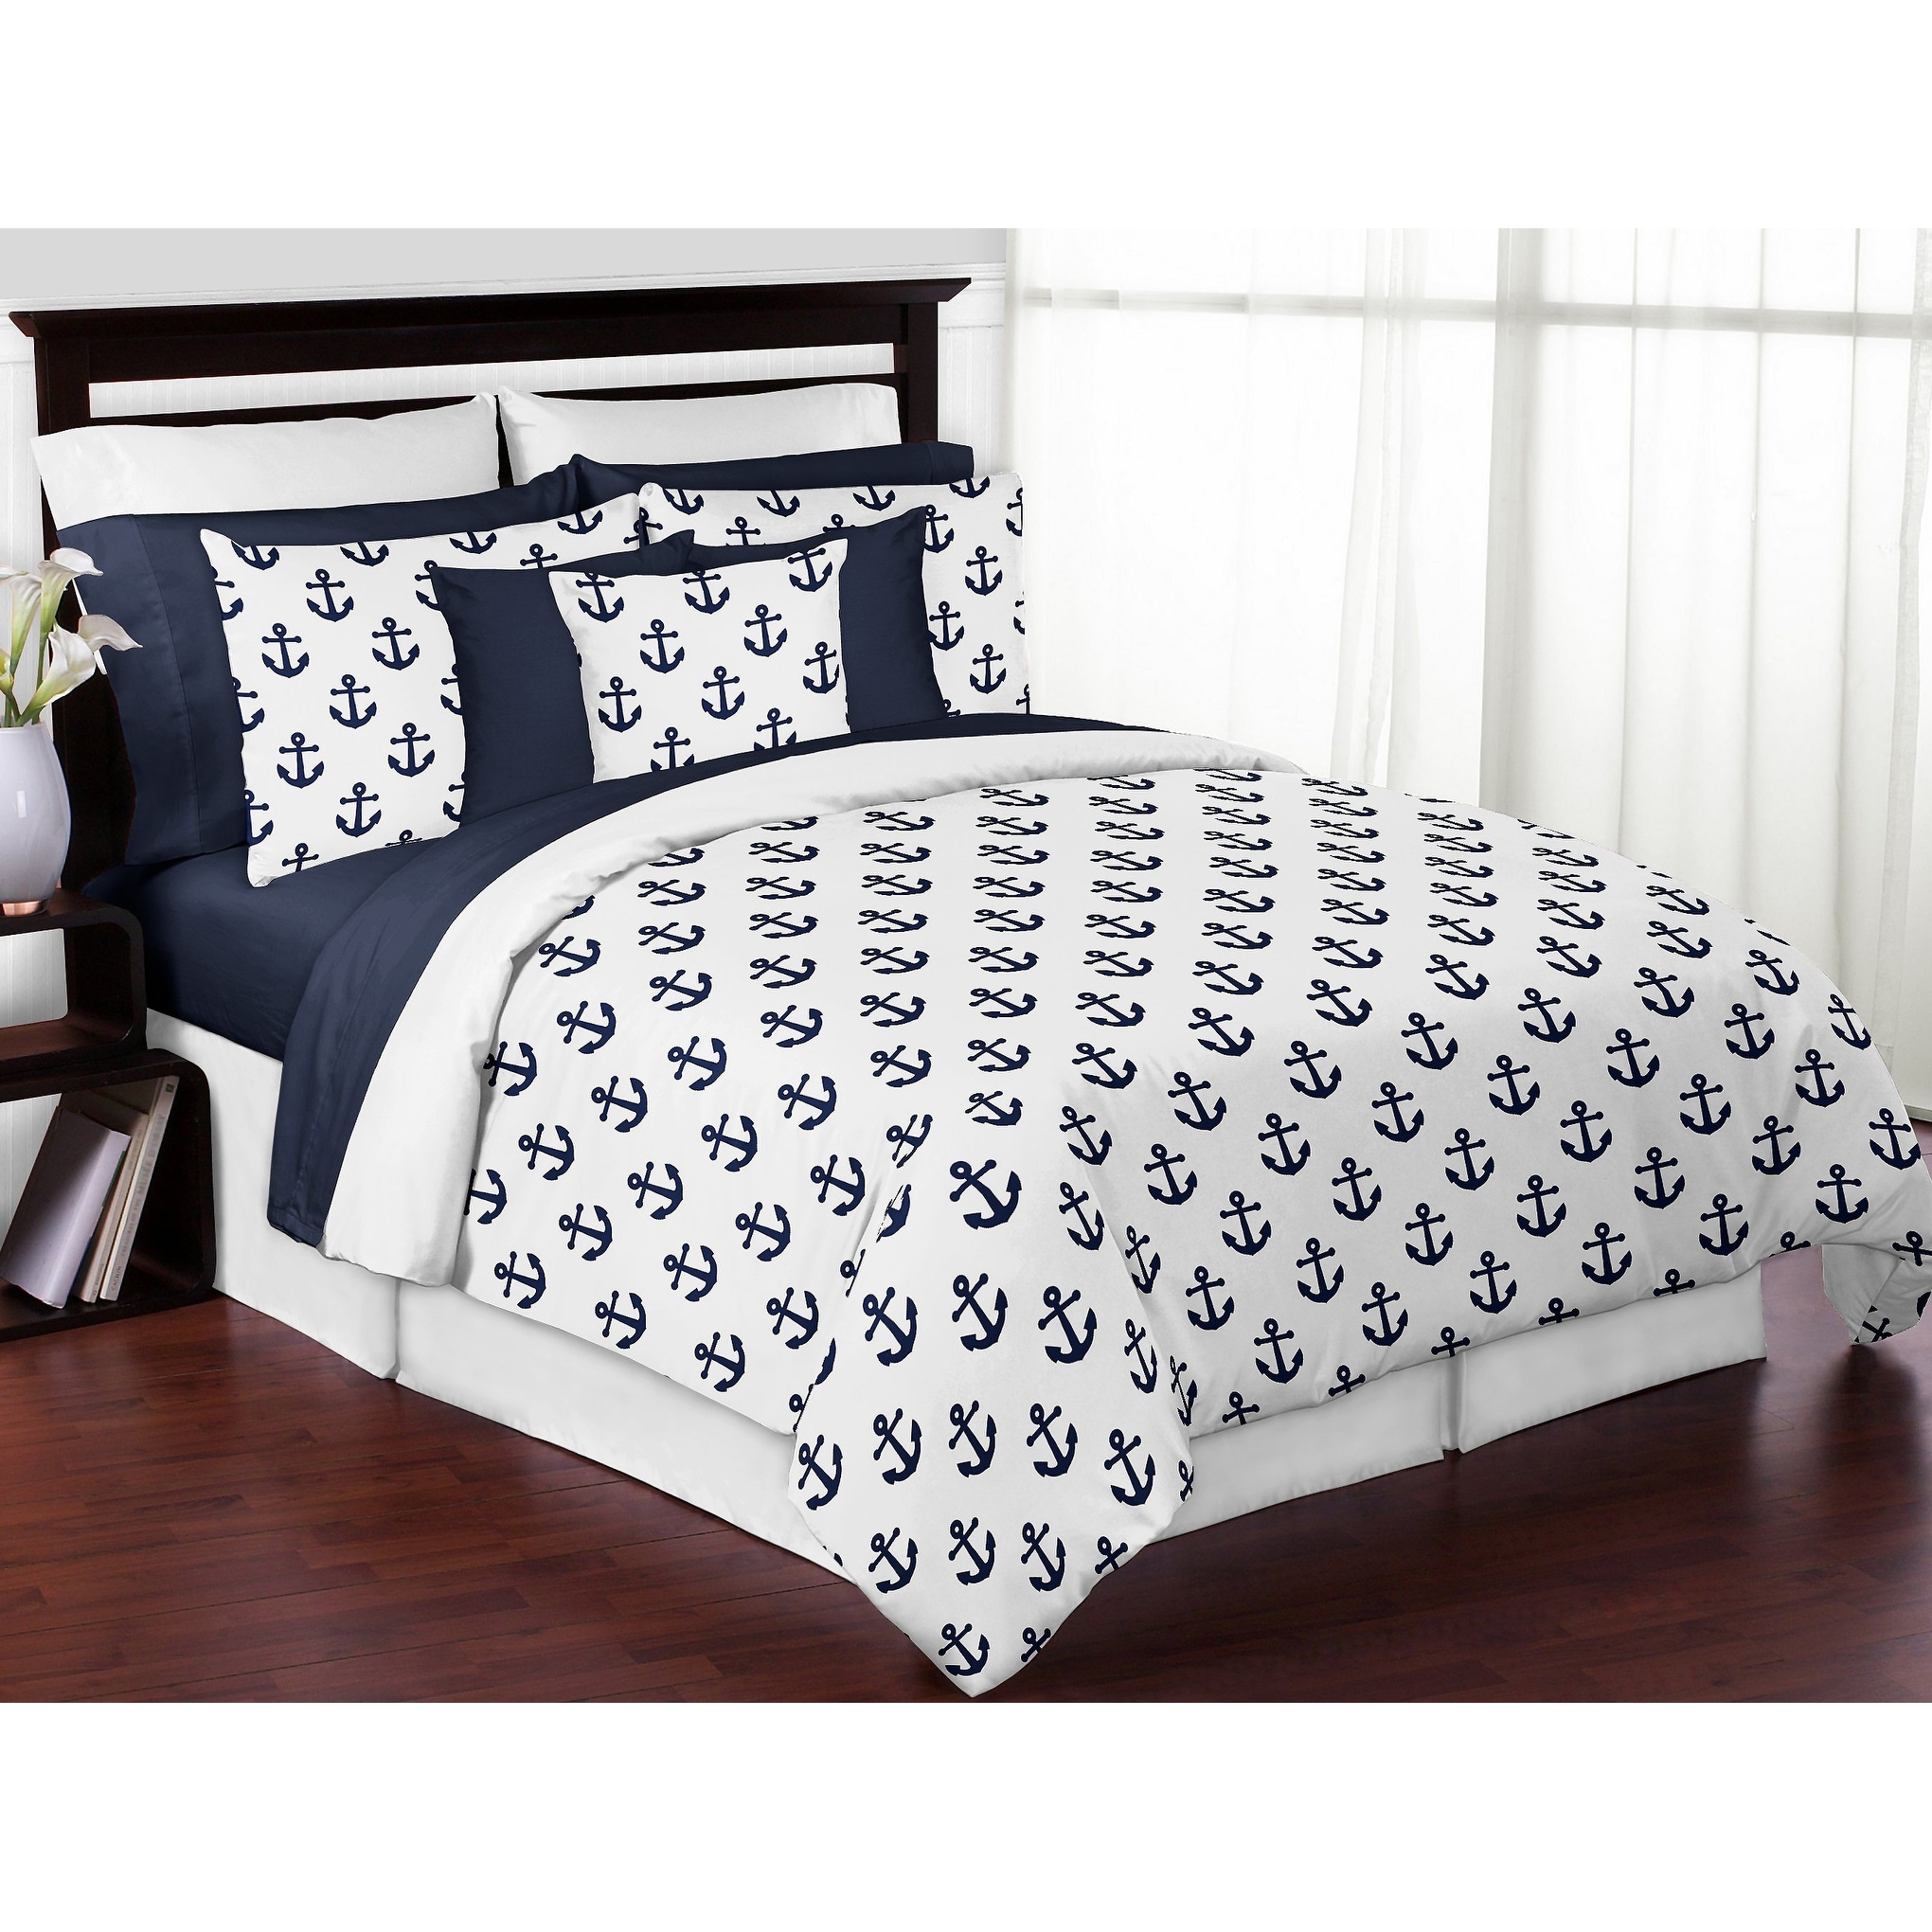 Twin, 68x86 inches Navy Wave and Stripes on White Reversible Design Joyreap 3pcs Comforter Set Soft Microfiber Comforter for All Season